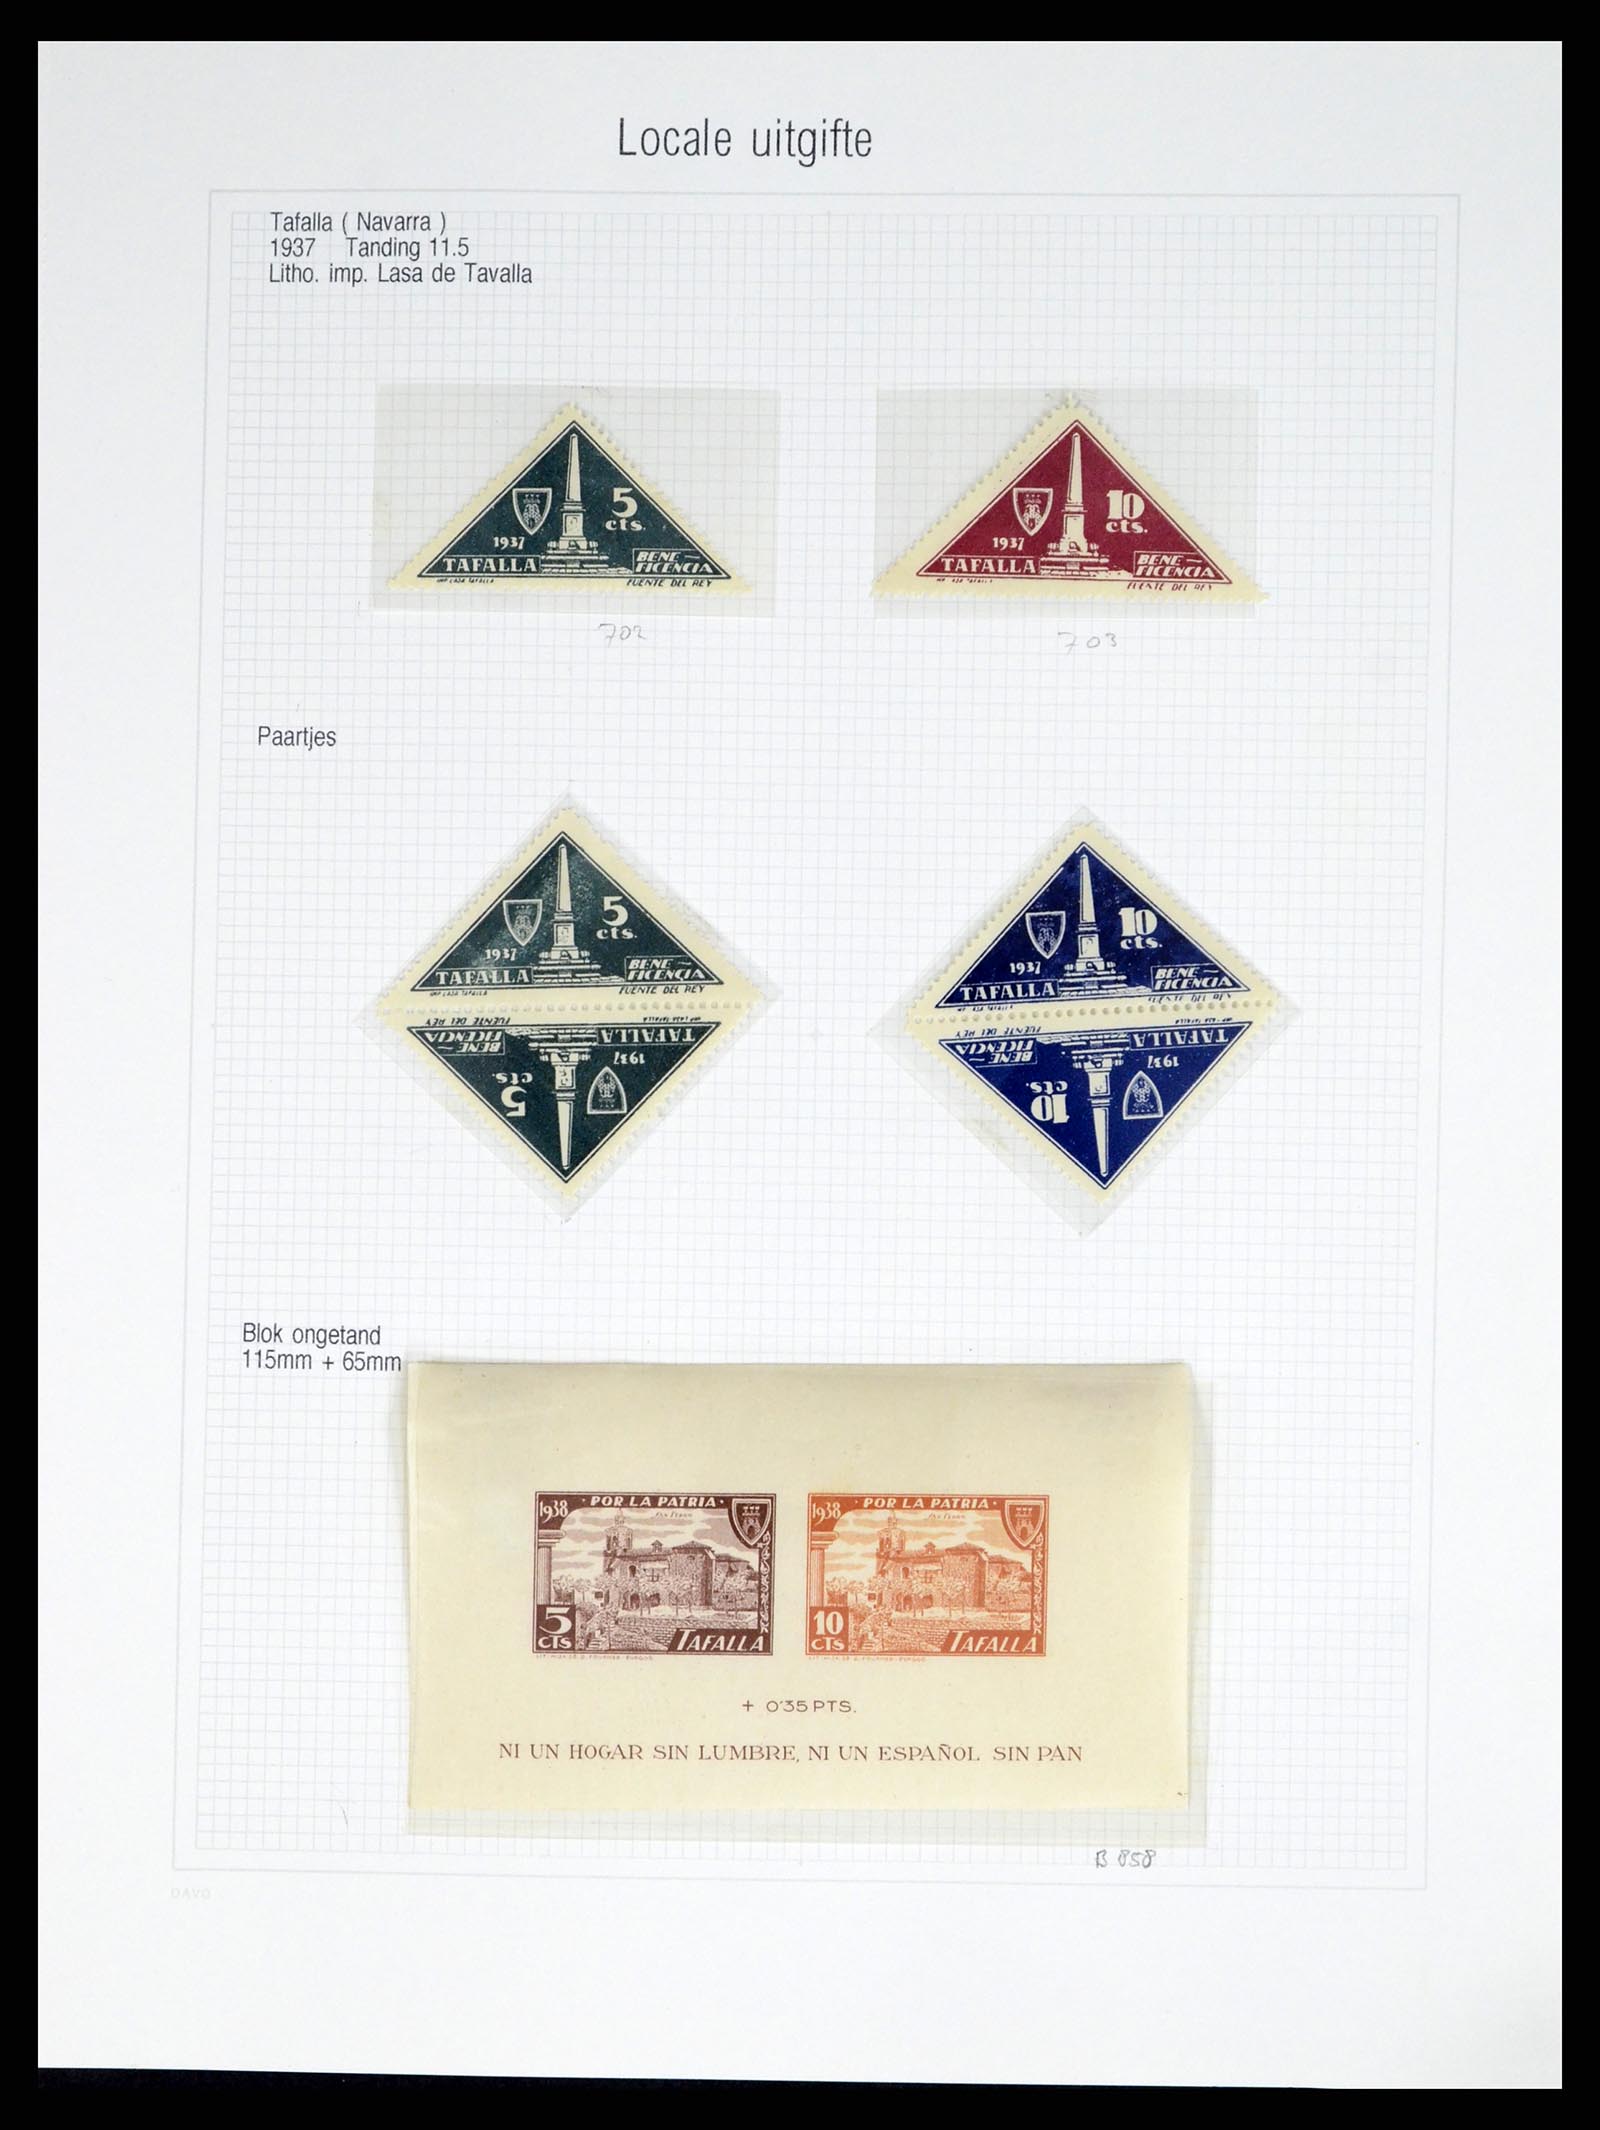 37837 096 - Stamp Collection 37837 Spansish civil war and local post 1893-1945.